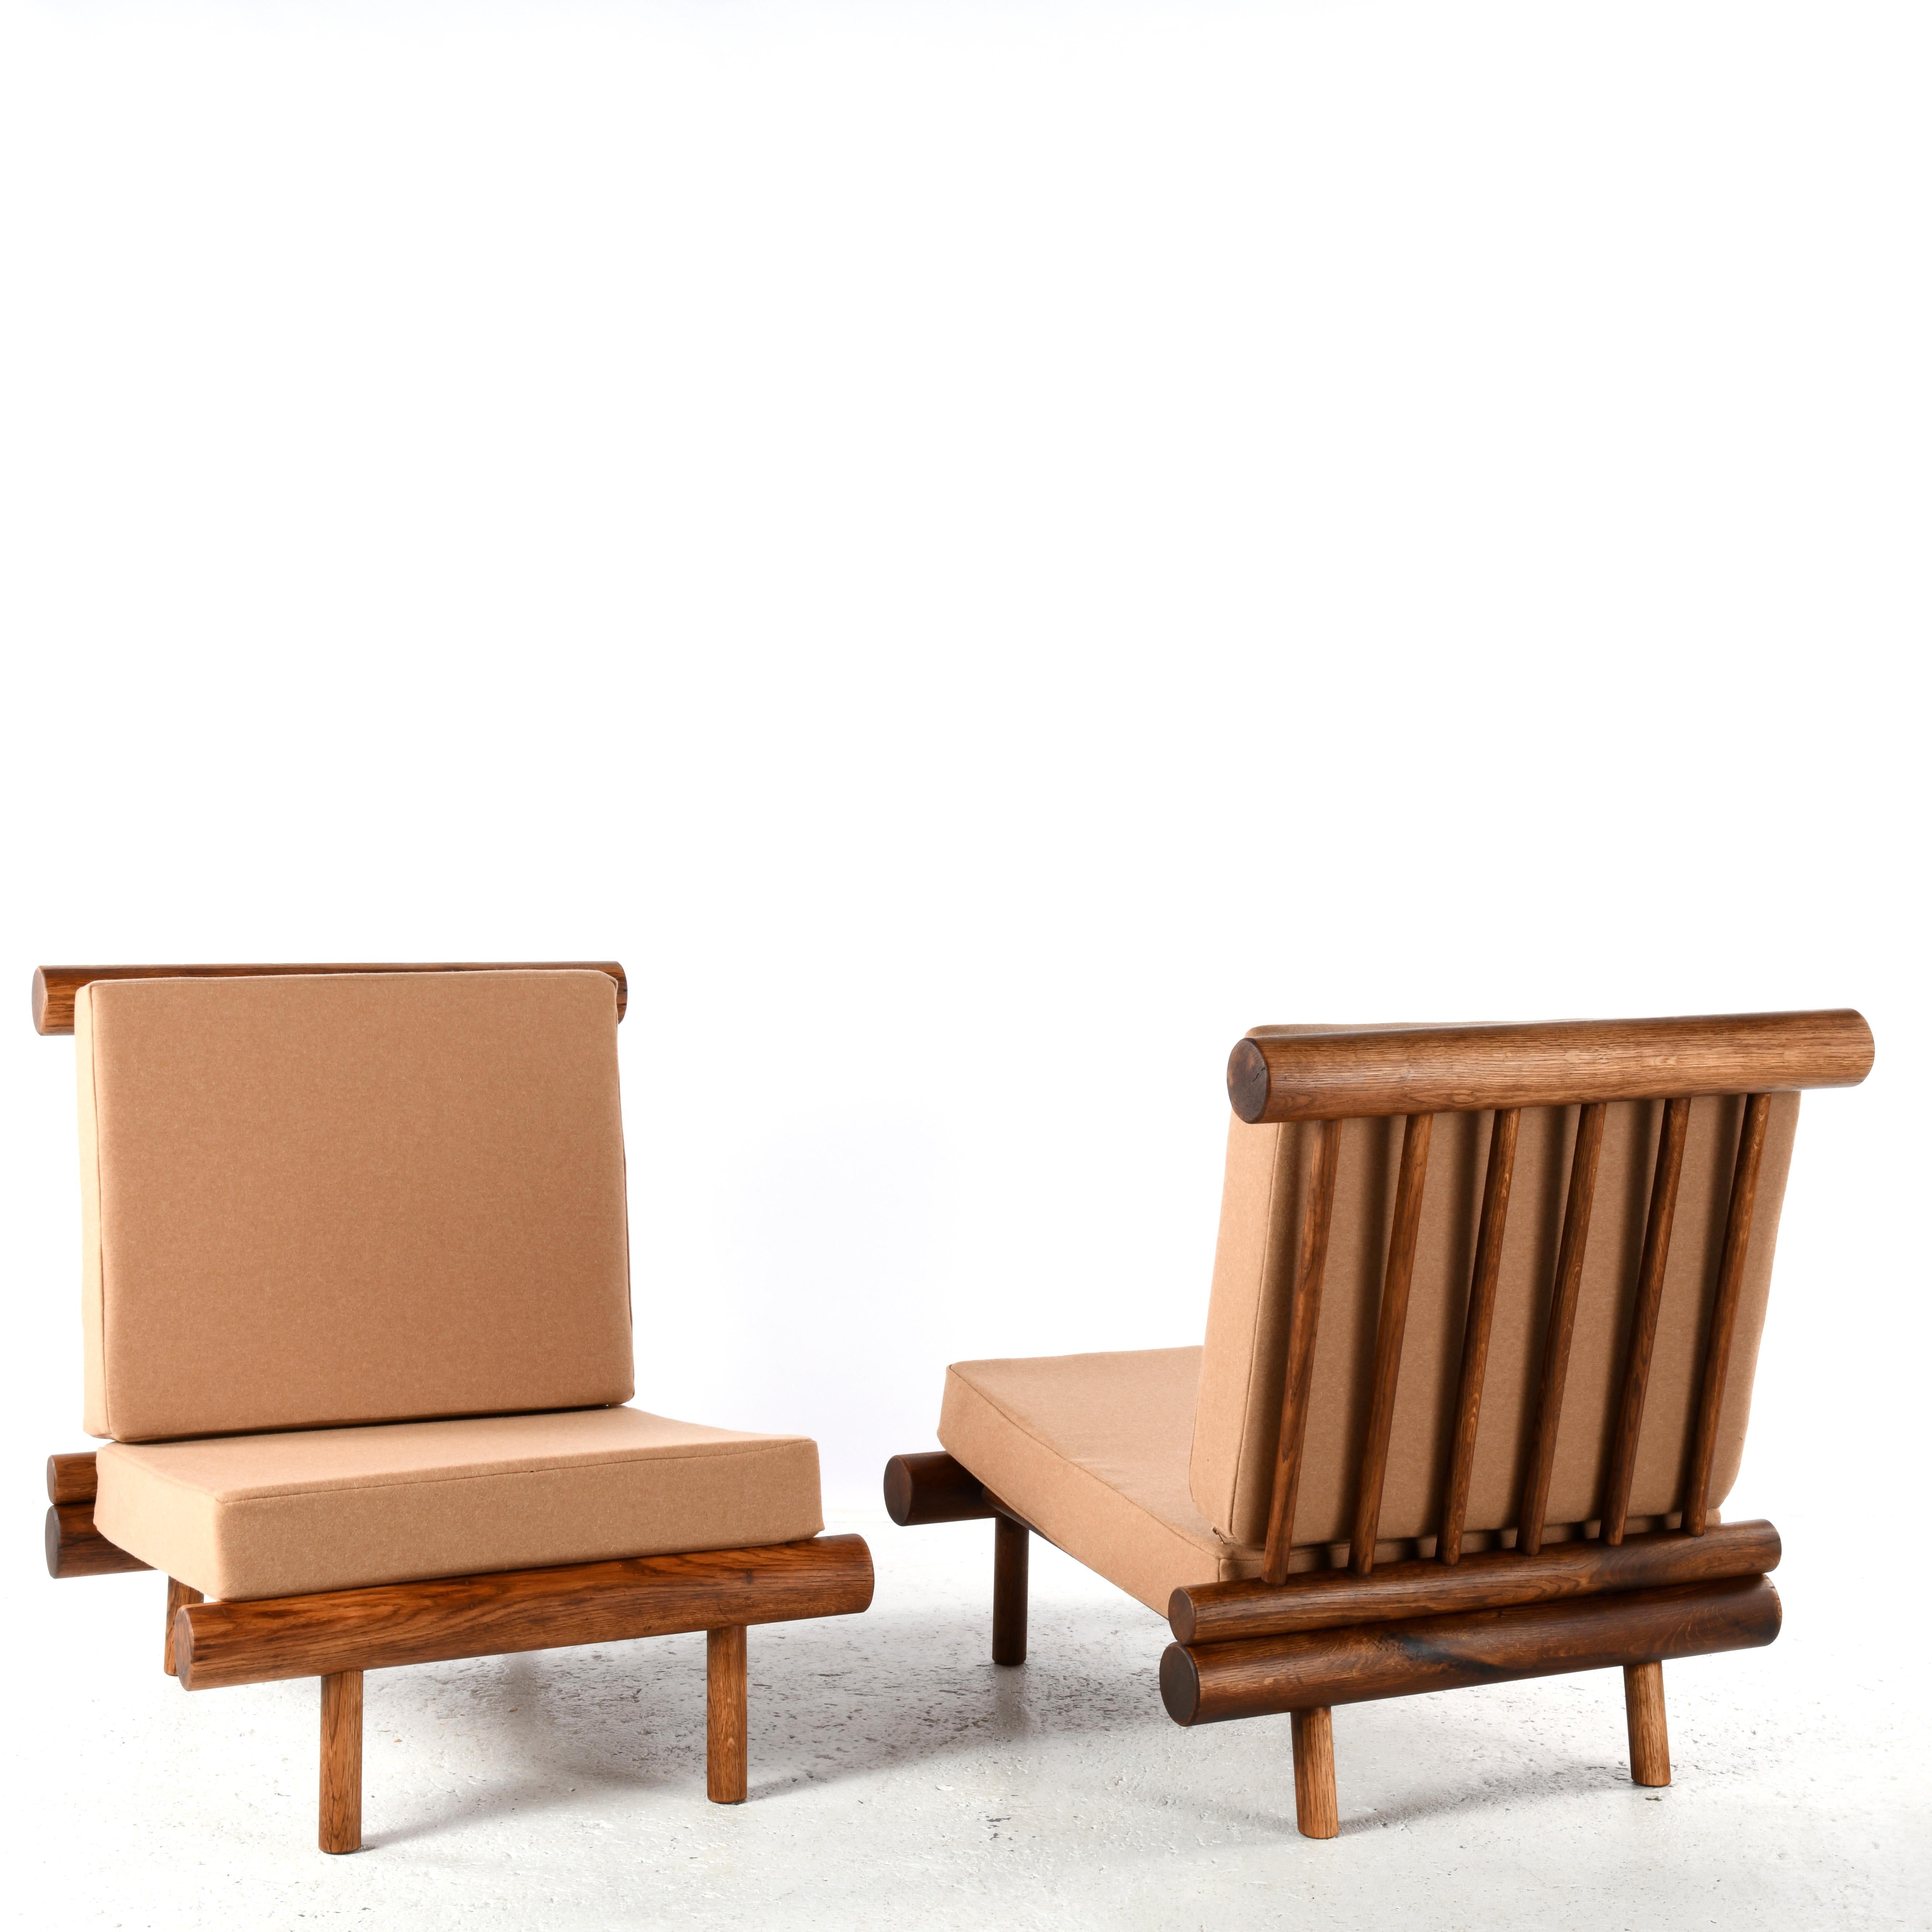 Pair of oak fireside chairs attributed to Charlotte Perriand. These chairs come from the La Cachette residence, located in the Les Arcs 1600 ski resort in the French Alps. Charlotte Perriand, the famous French architect and designer, directed the